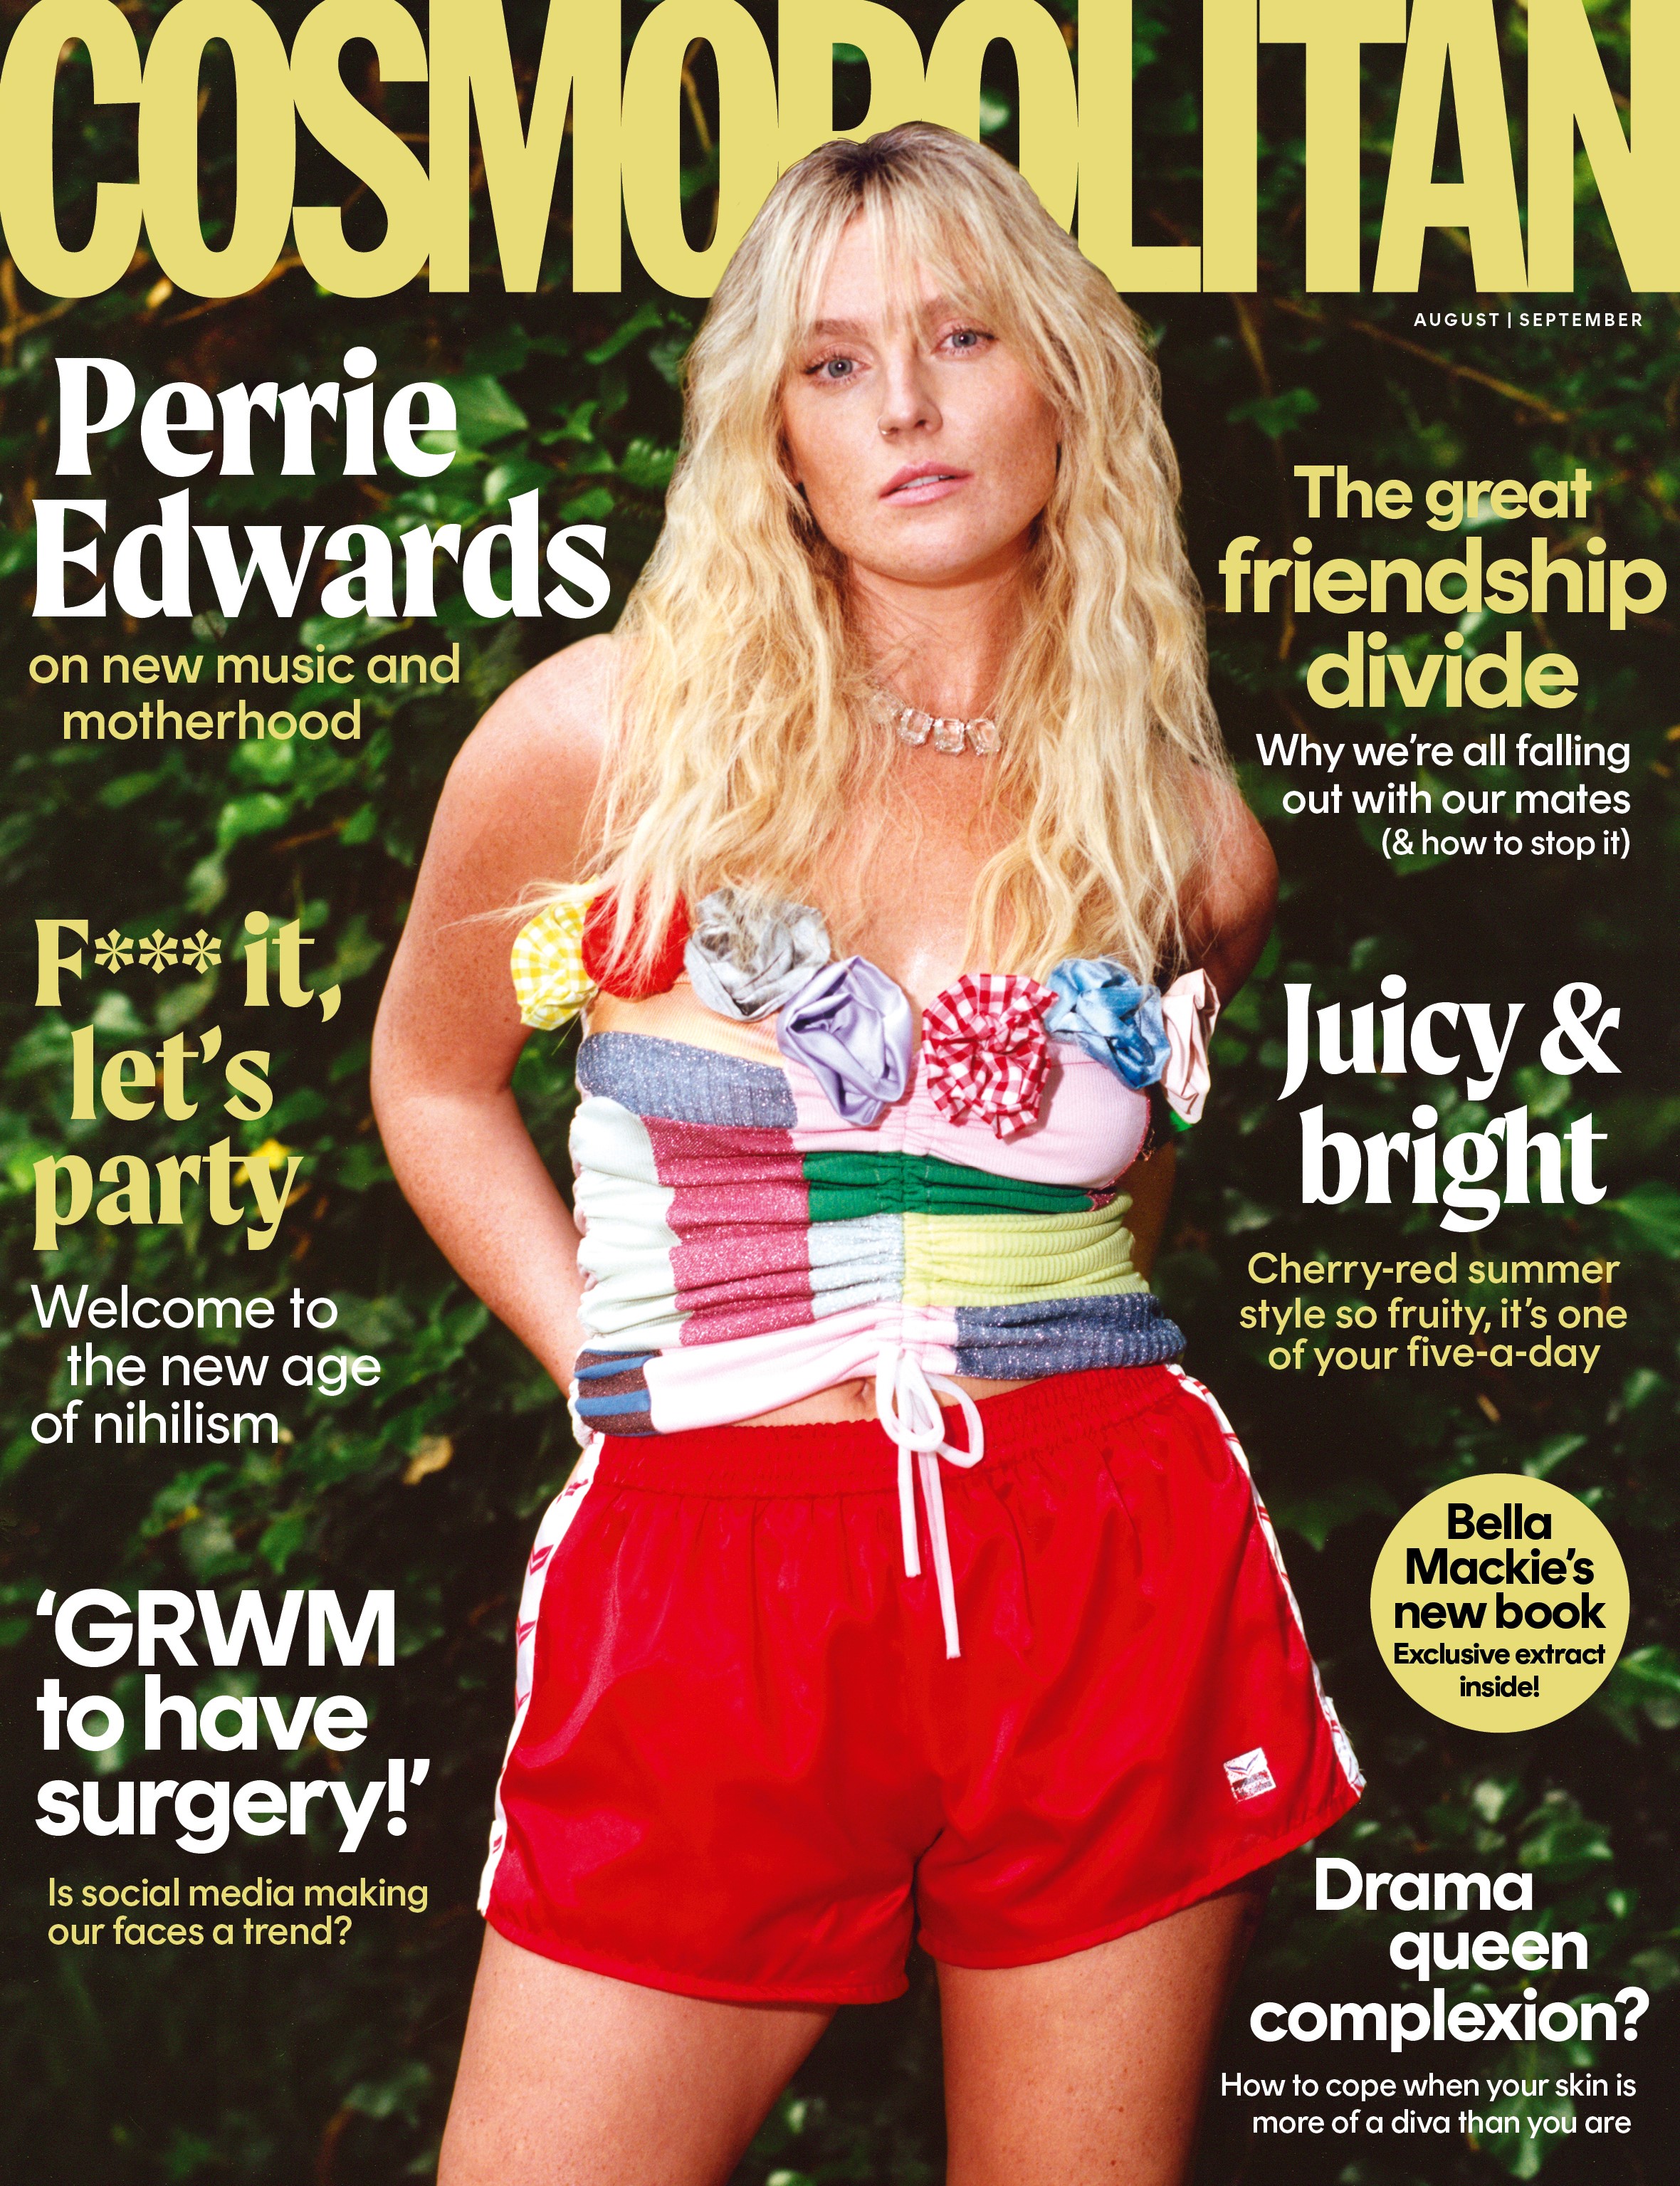 Perrie Edwards on the cover of Cosmopolitan